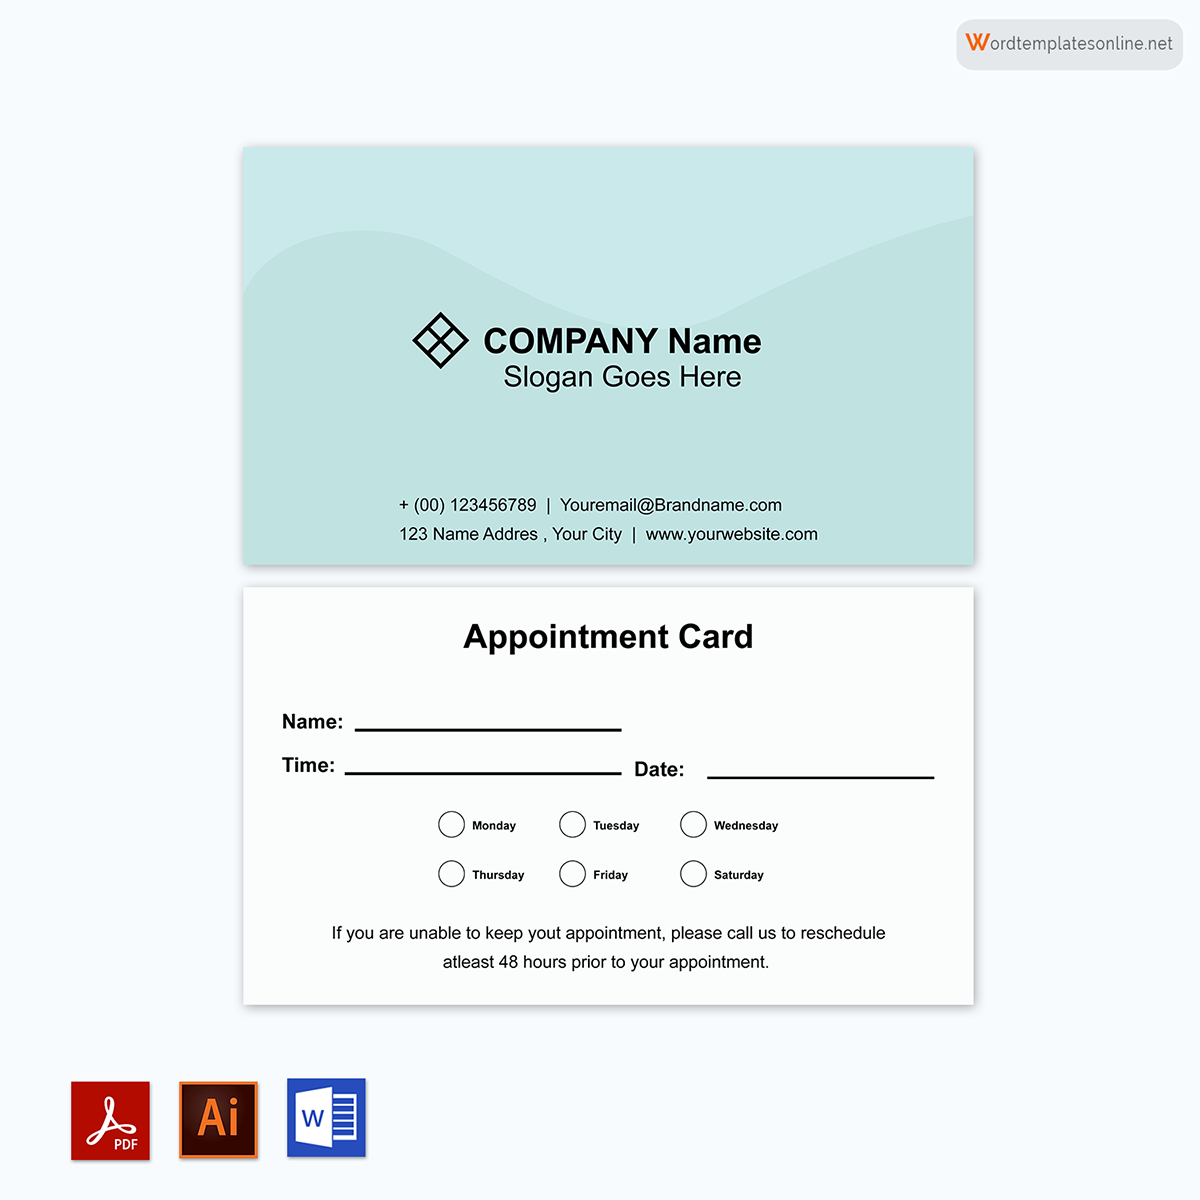 Editable Appointment Card Template - Free Download